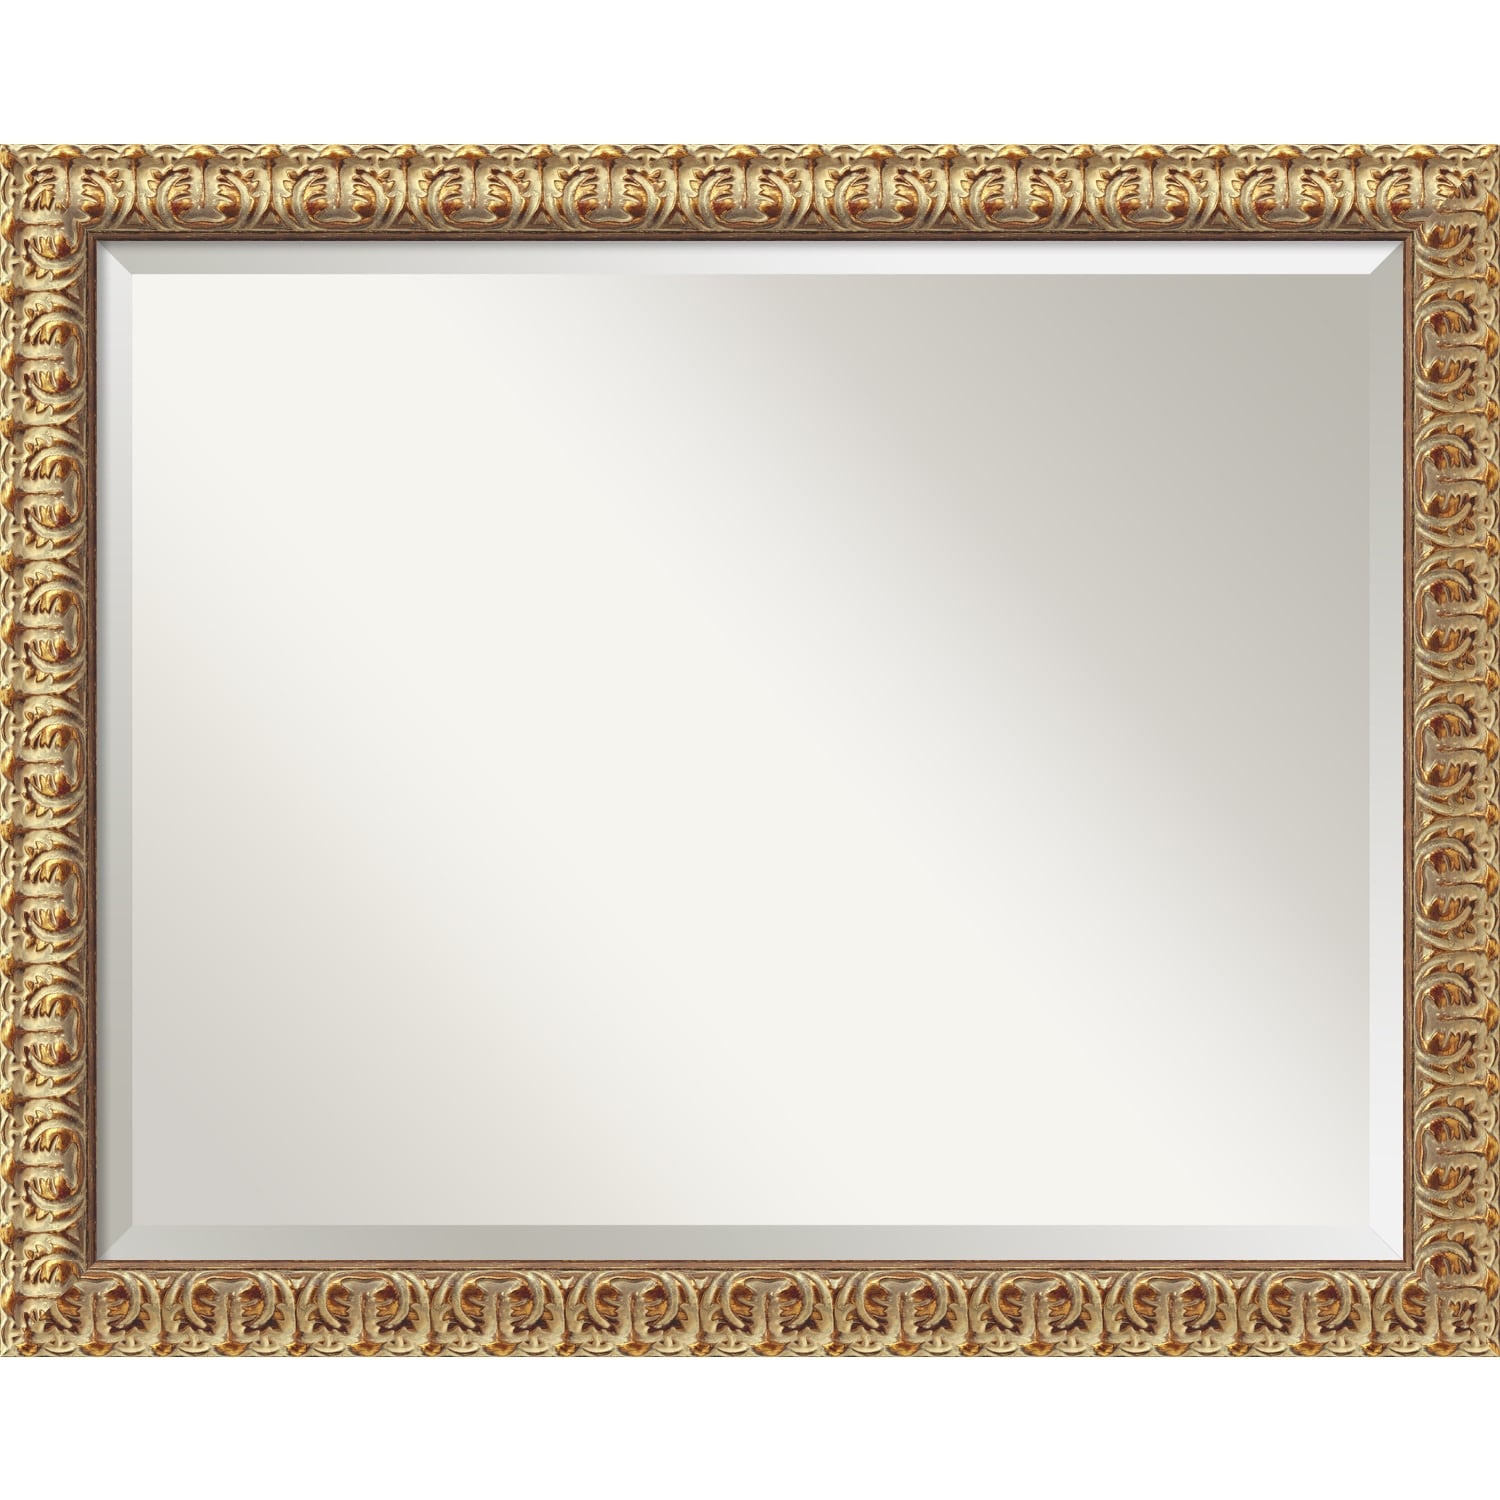 Florentine Gold Wall Mirror - 31.5W x 25.5H in. - image 2 of 5